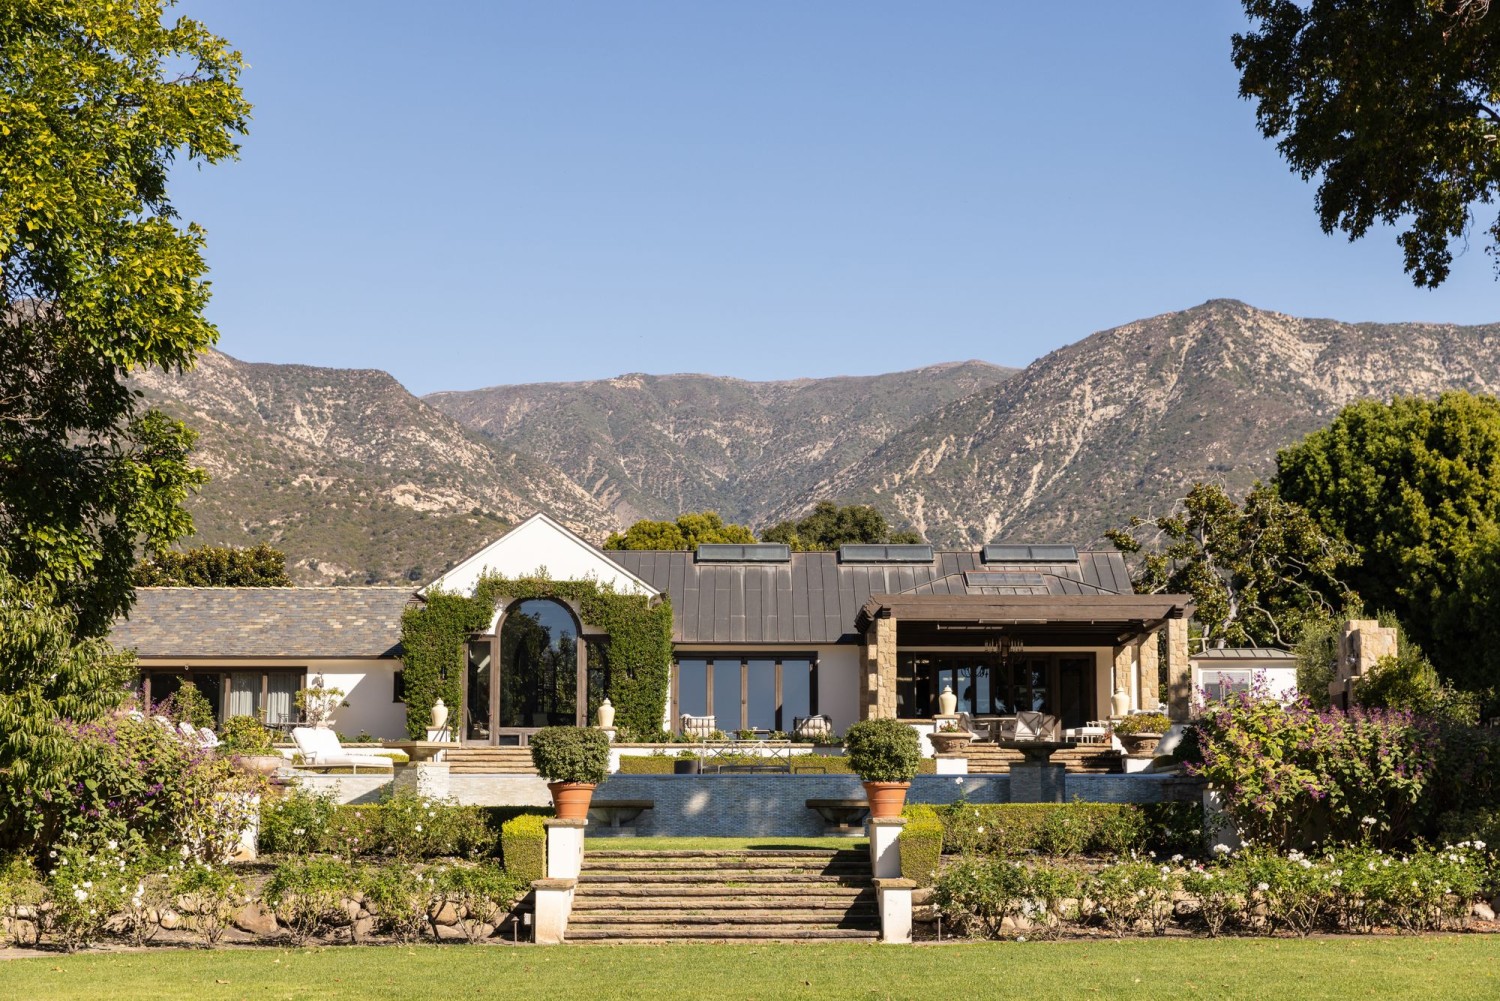 Pop star Katy Perry and business mogul Carl Westcott have battled in court for years for the right to own this home in Santa Barbara, Calif. NATASHA LEE FOR THE WALL STREET JOURNAL